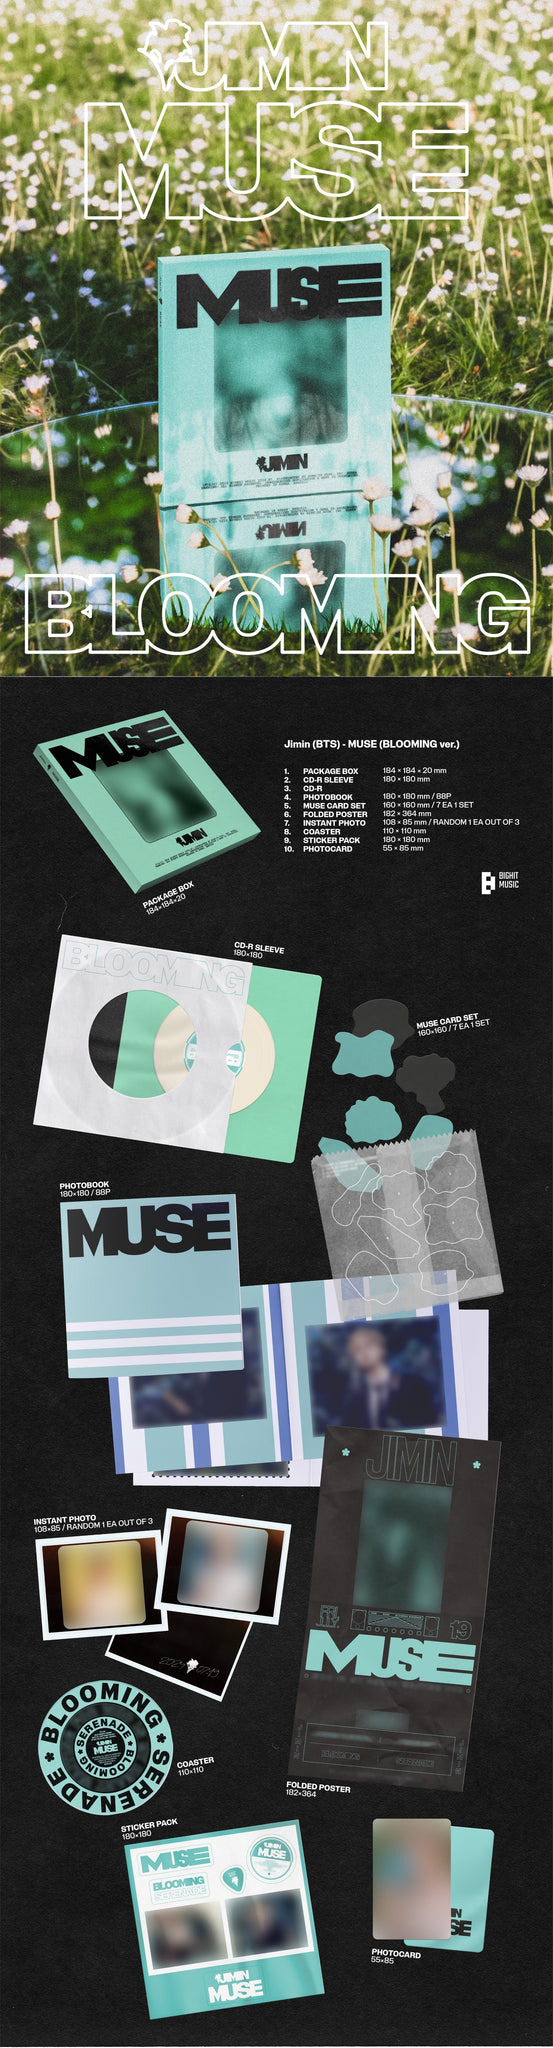 Jimin (BTS) 2nd Solo Album MUSE - BLOOMING Version Inclusions: Package Box, Photobook, CD & Sleeve, MUSE Card Set, Folded Poster, Instant Photo, Coaster, Sticker Pack, Photocard